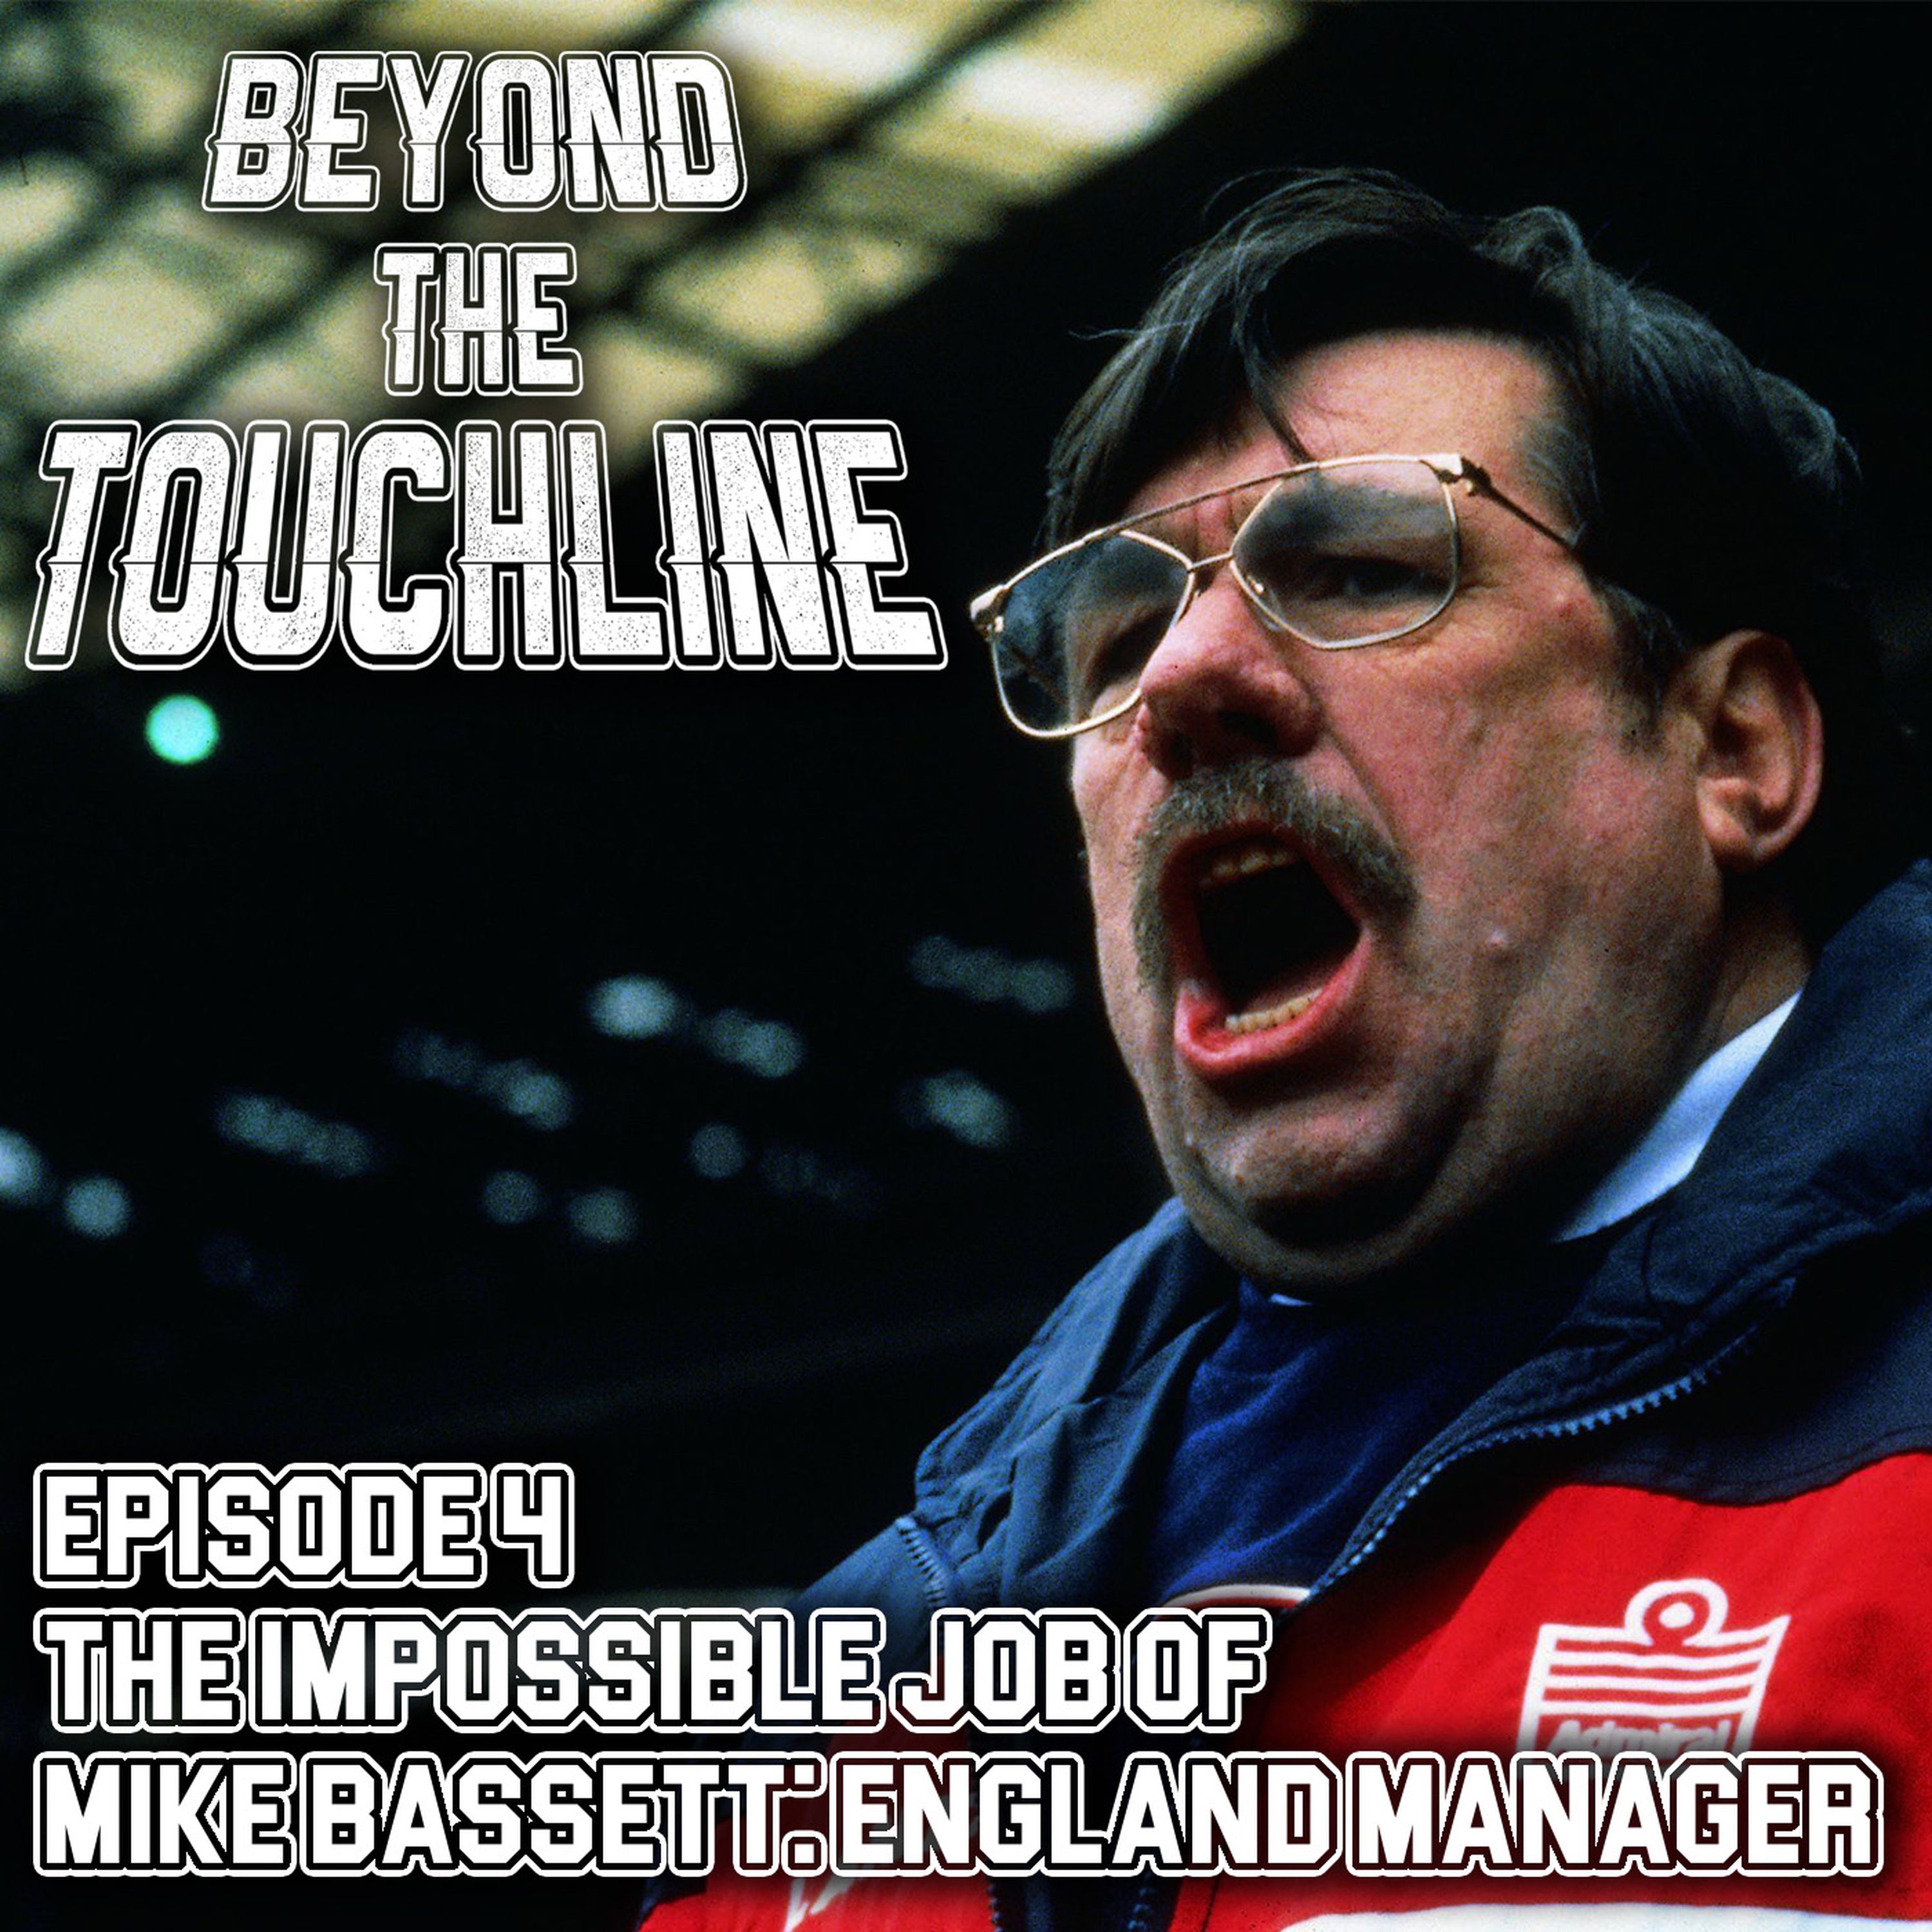 The Impossible Job of Mike Bassett: England Manager